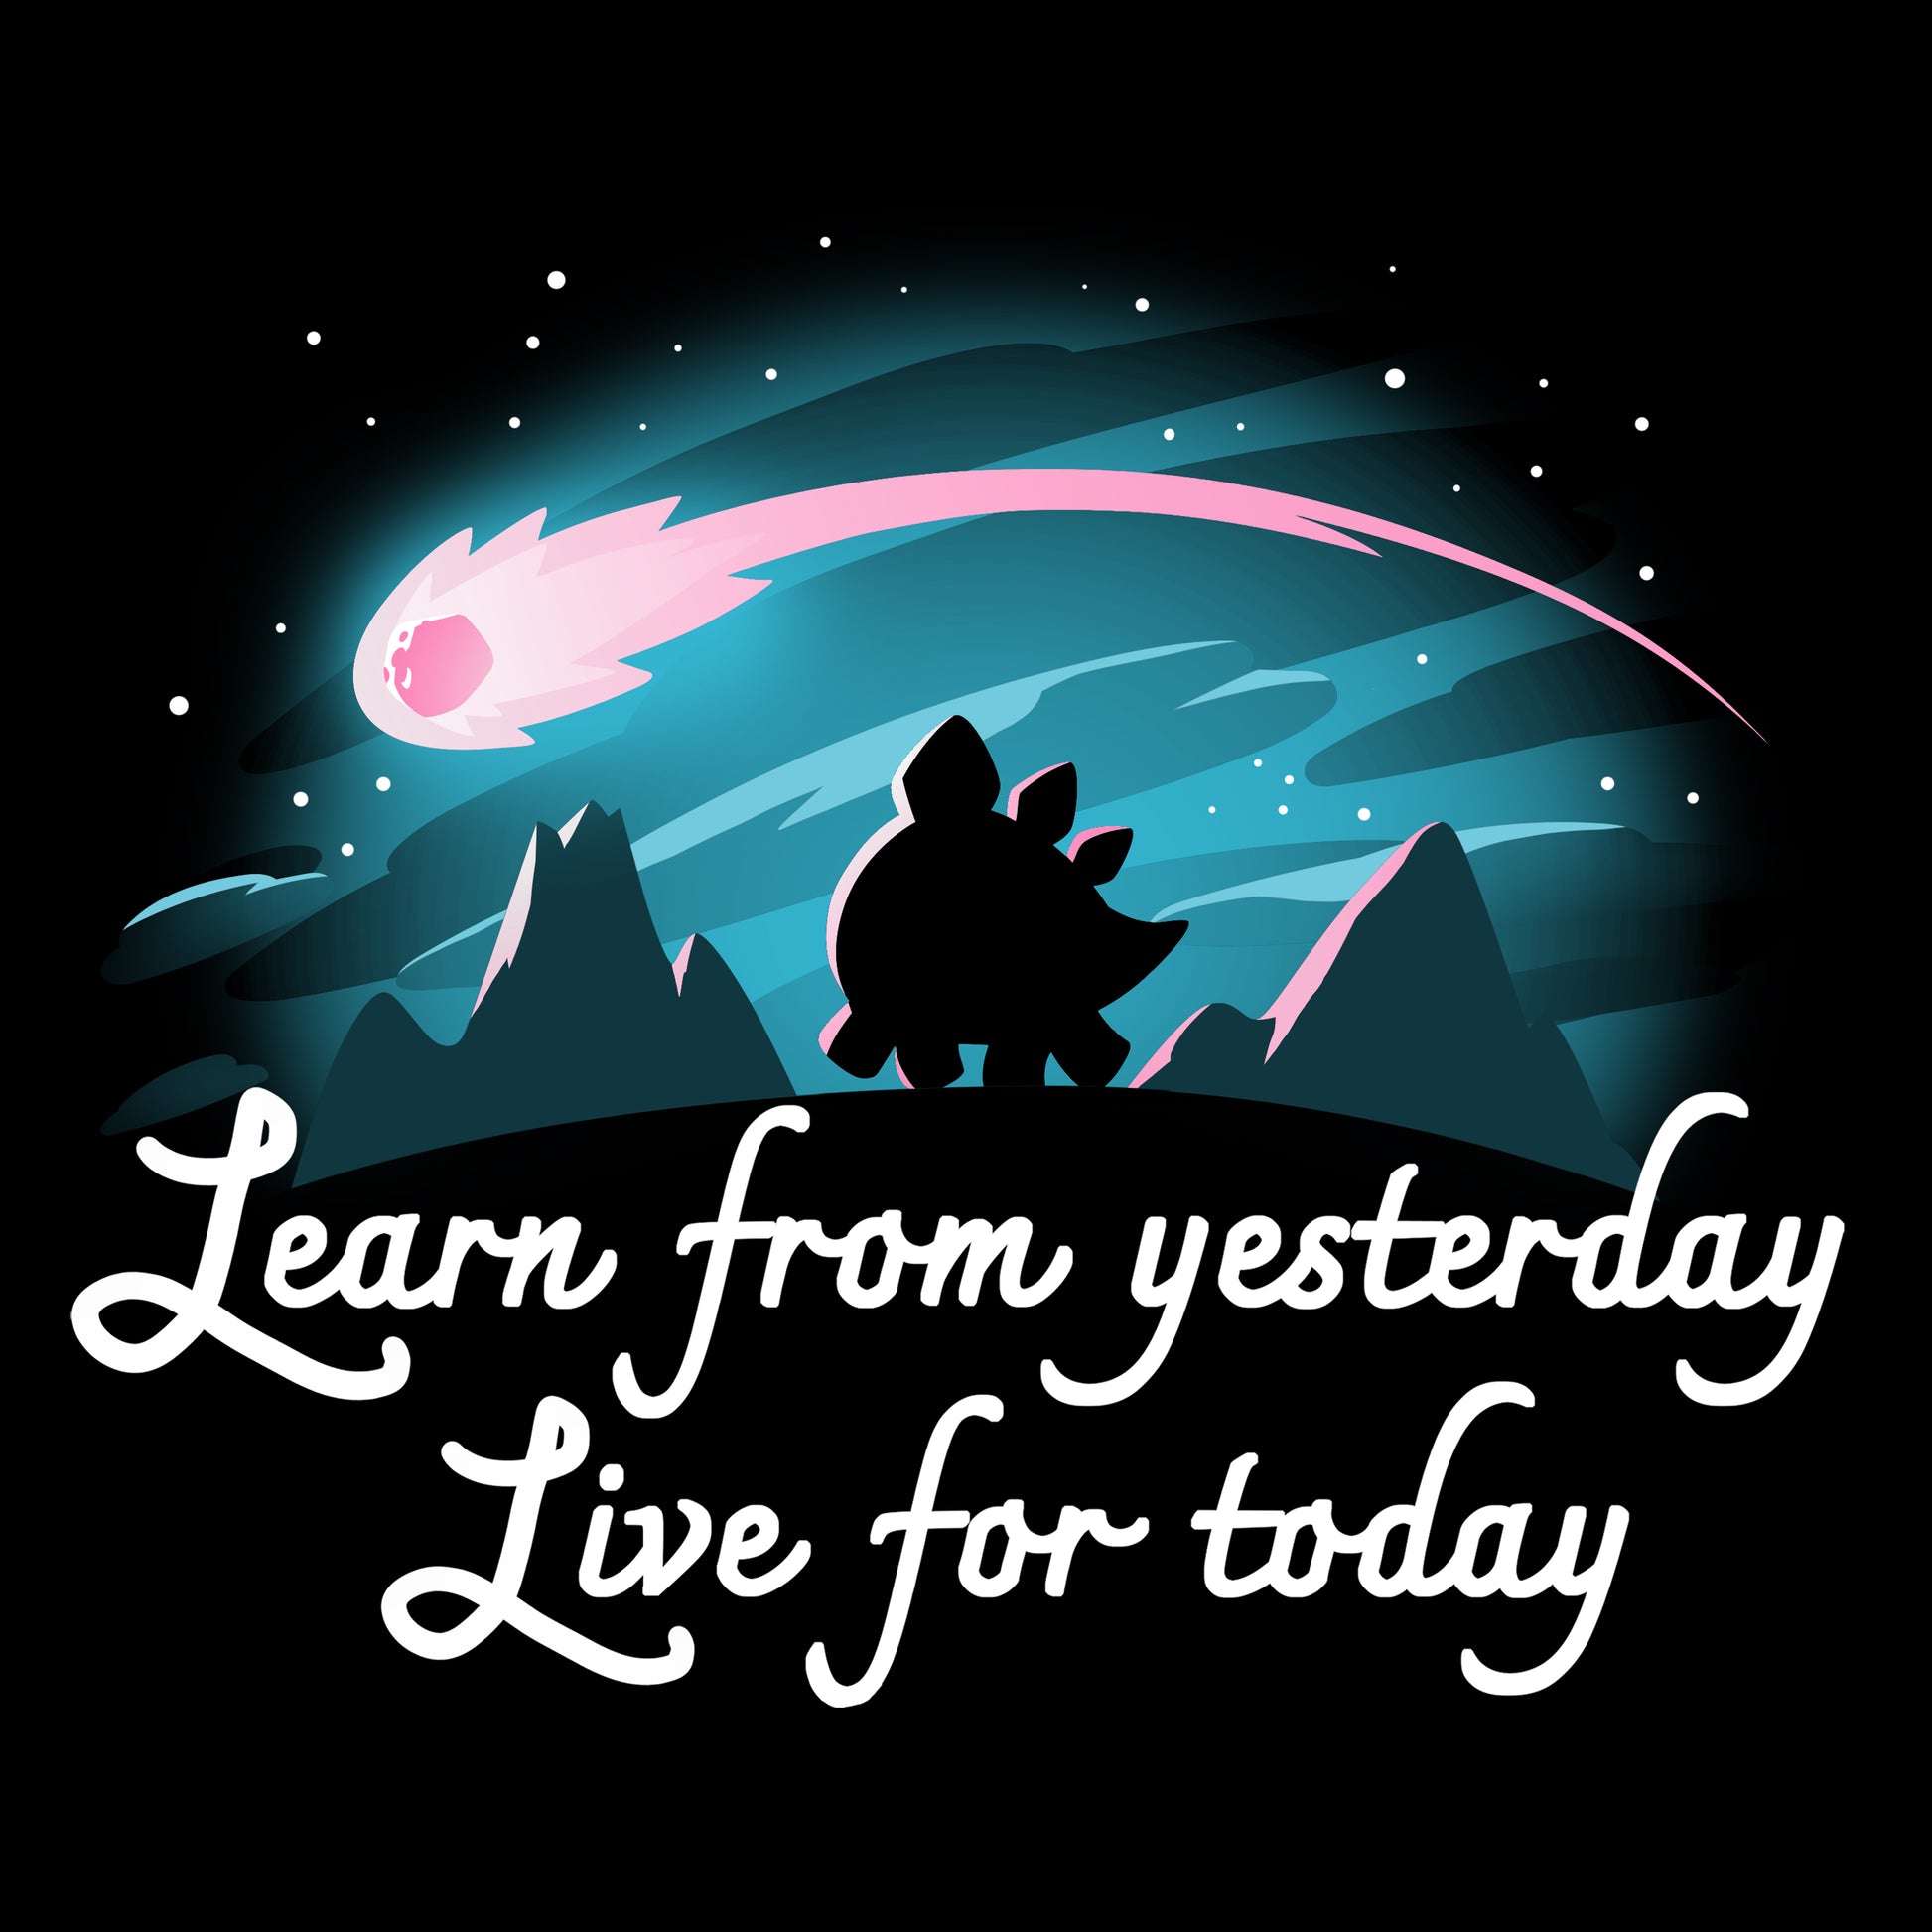 Learn From Yesterday, Live For Today TeeTurtle shirt to inspire living for today.